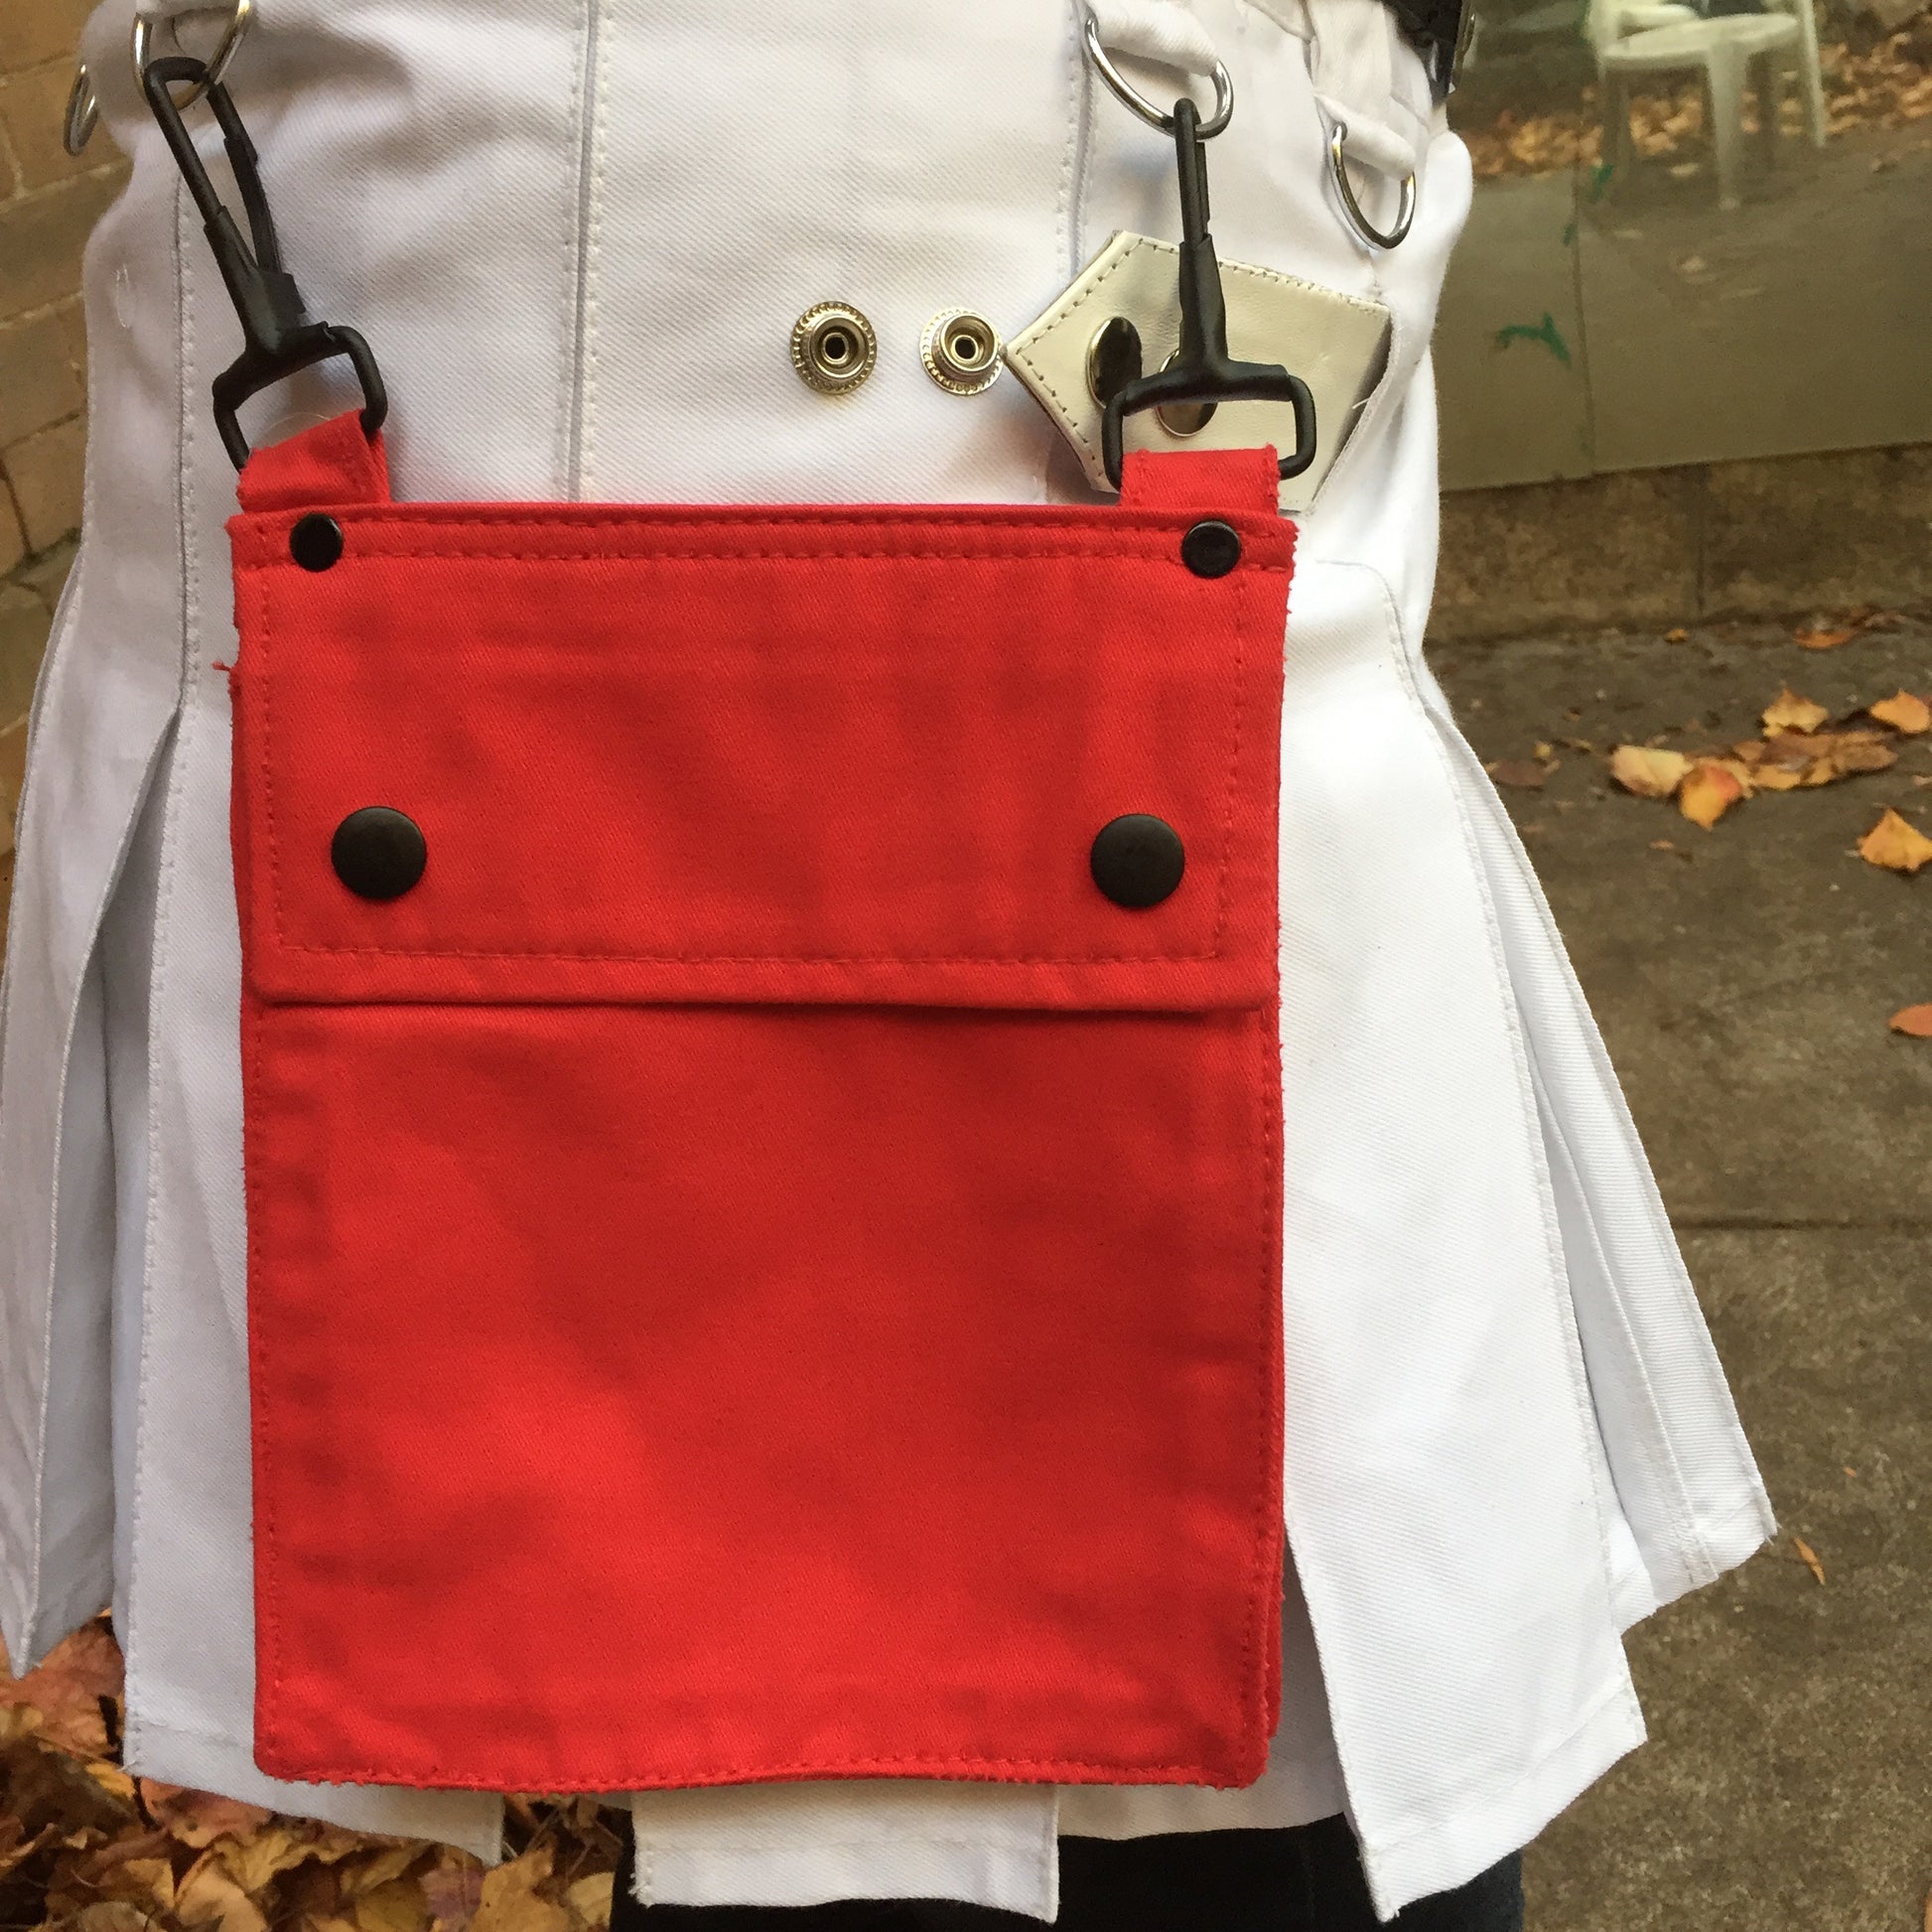 A model wearing the red Detachable Pocket for Heritage Kilt hooked to their kilt D-rings.